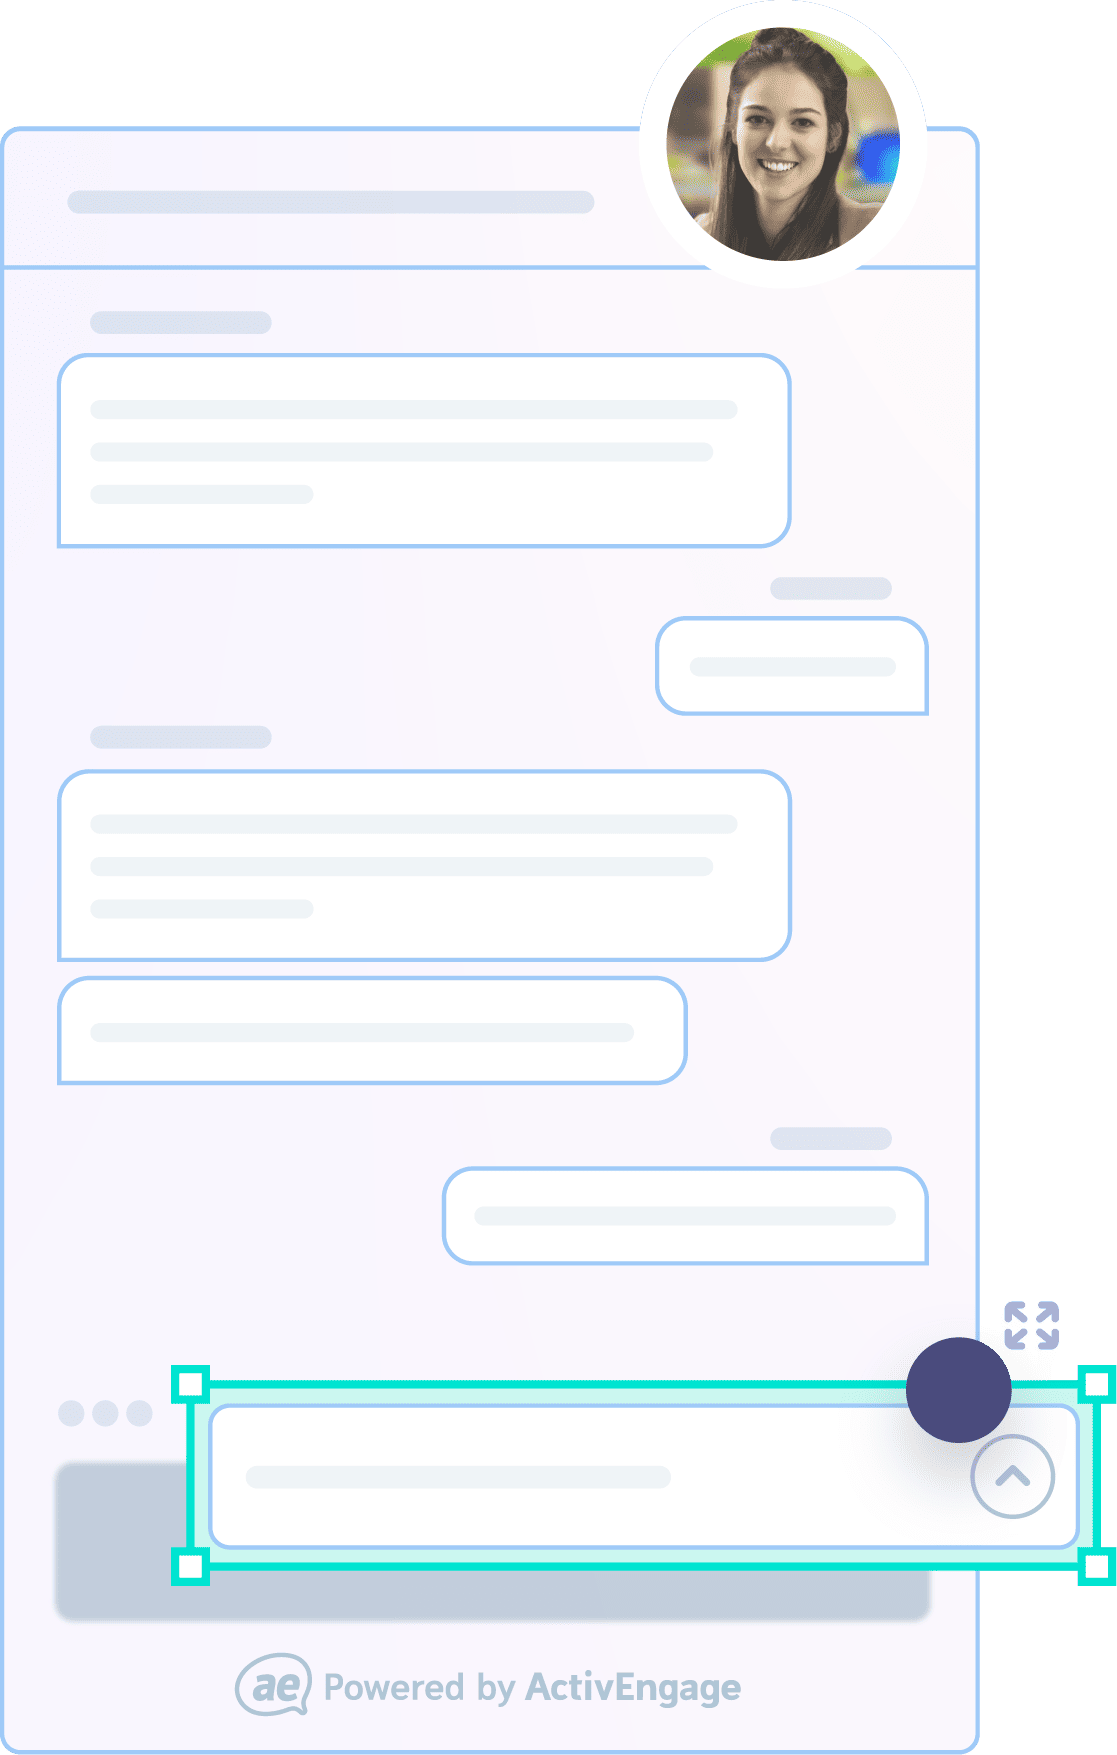 An example of a chat wireframe design by ActivEngage